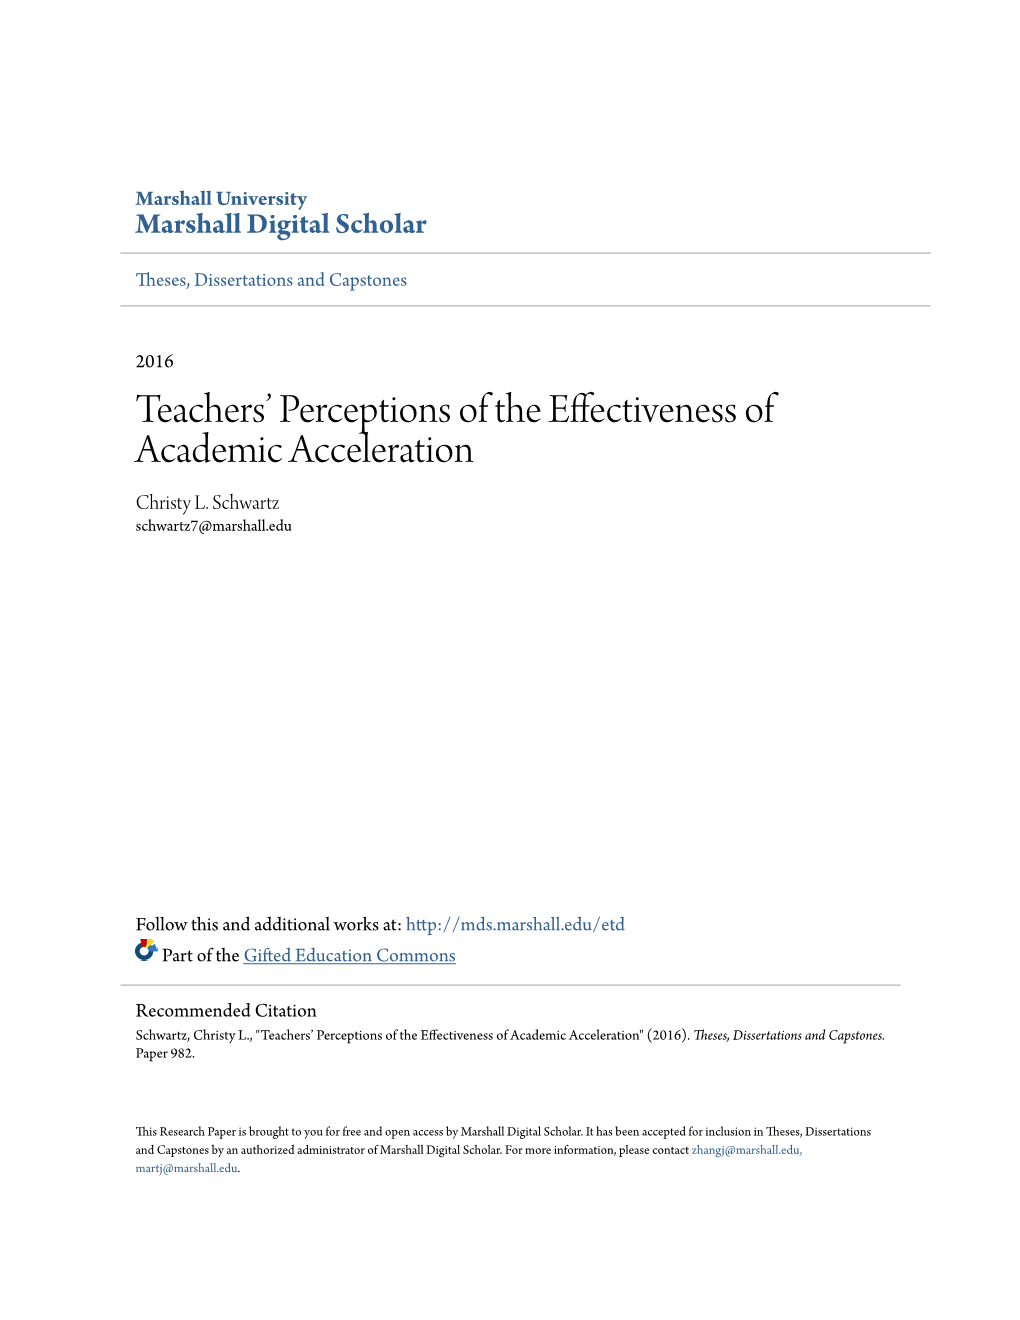 Teachers' Perceptions of the Effectiveness of Academic Acceleration